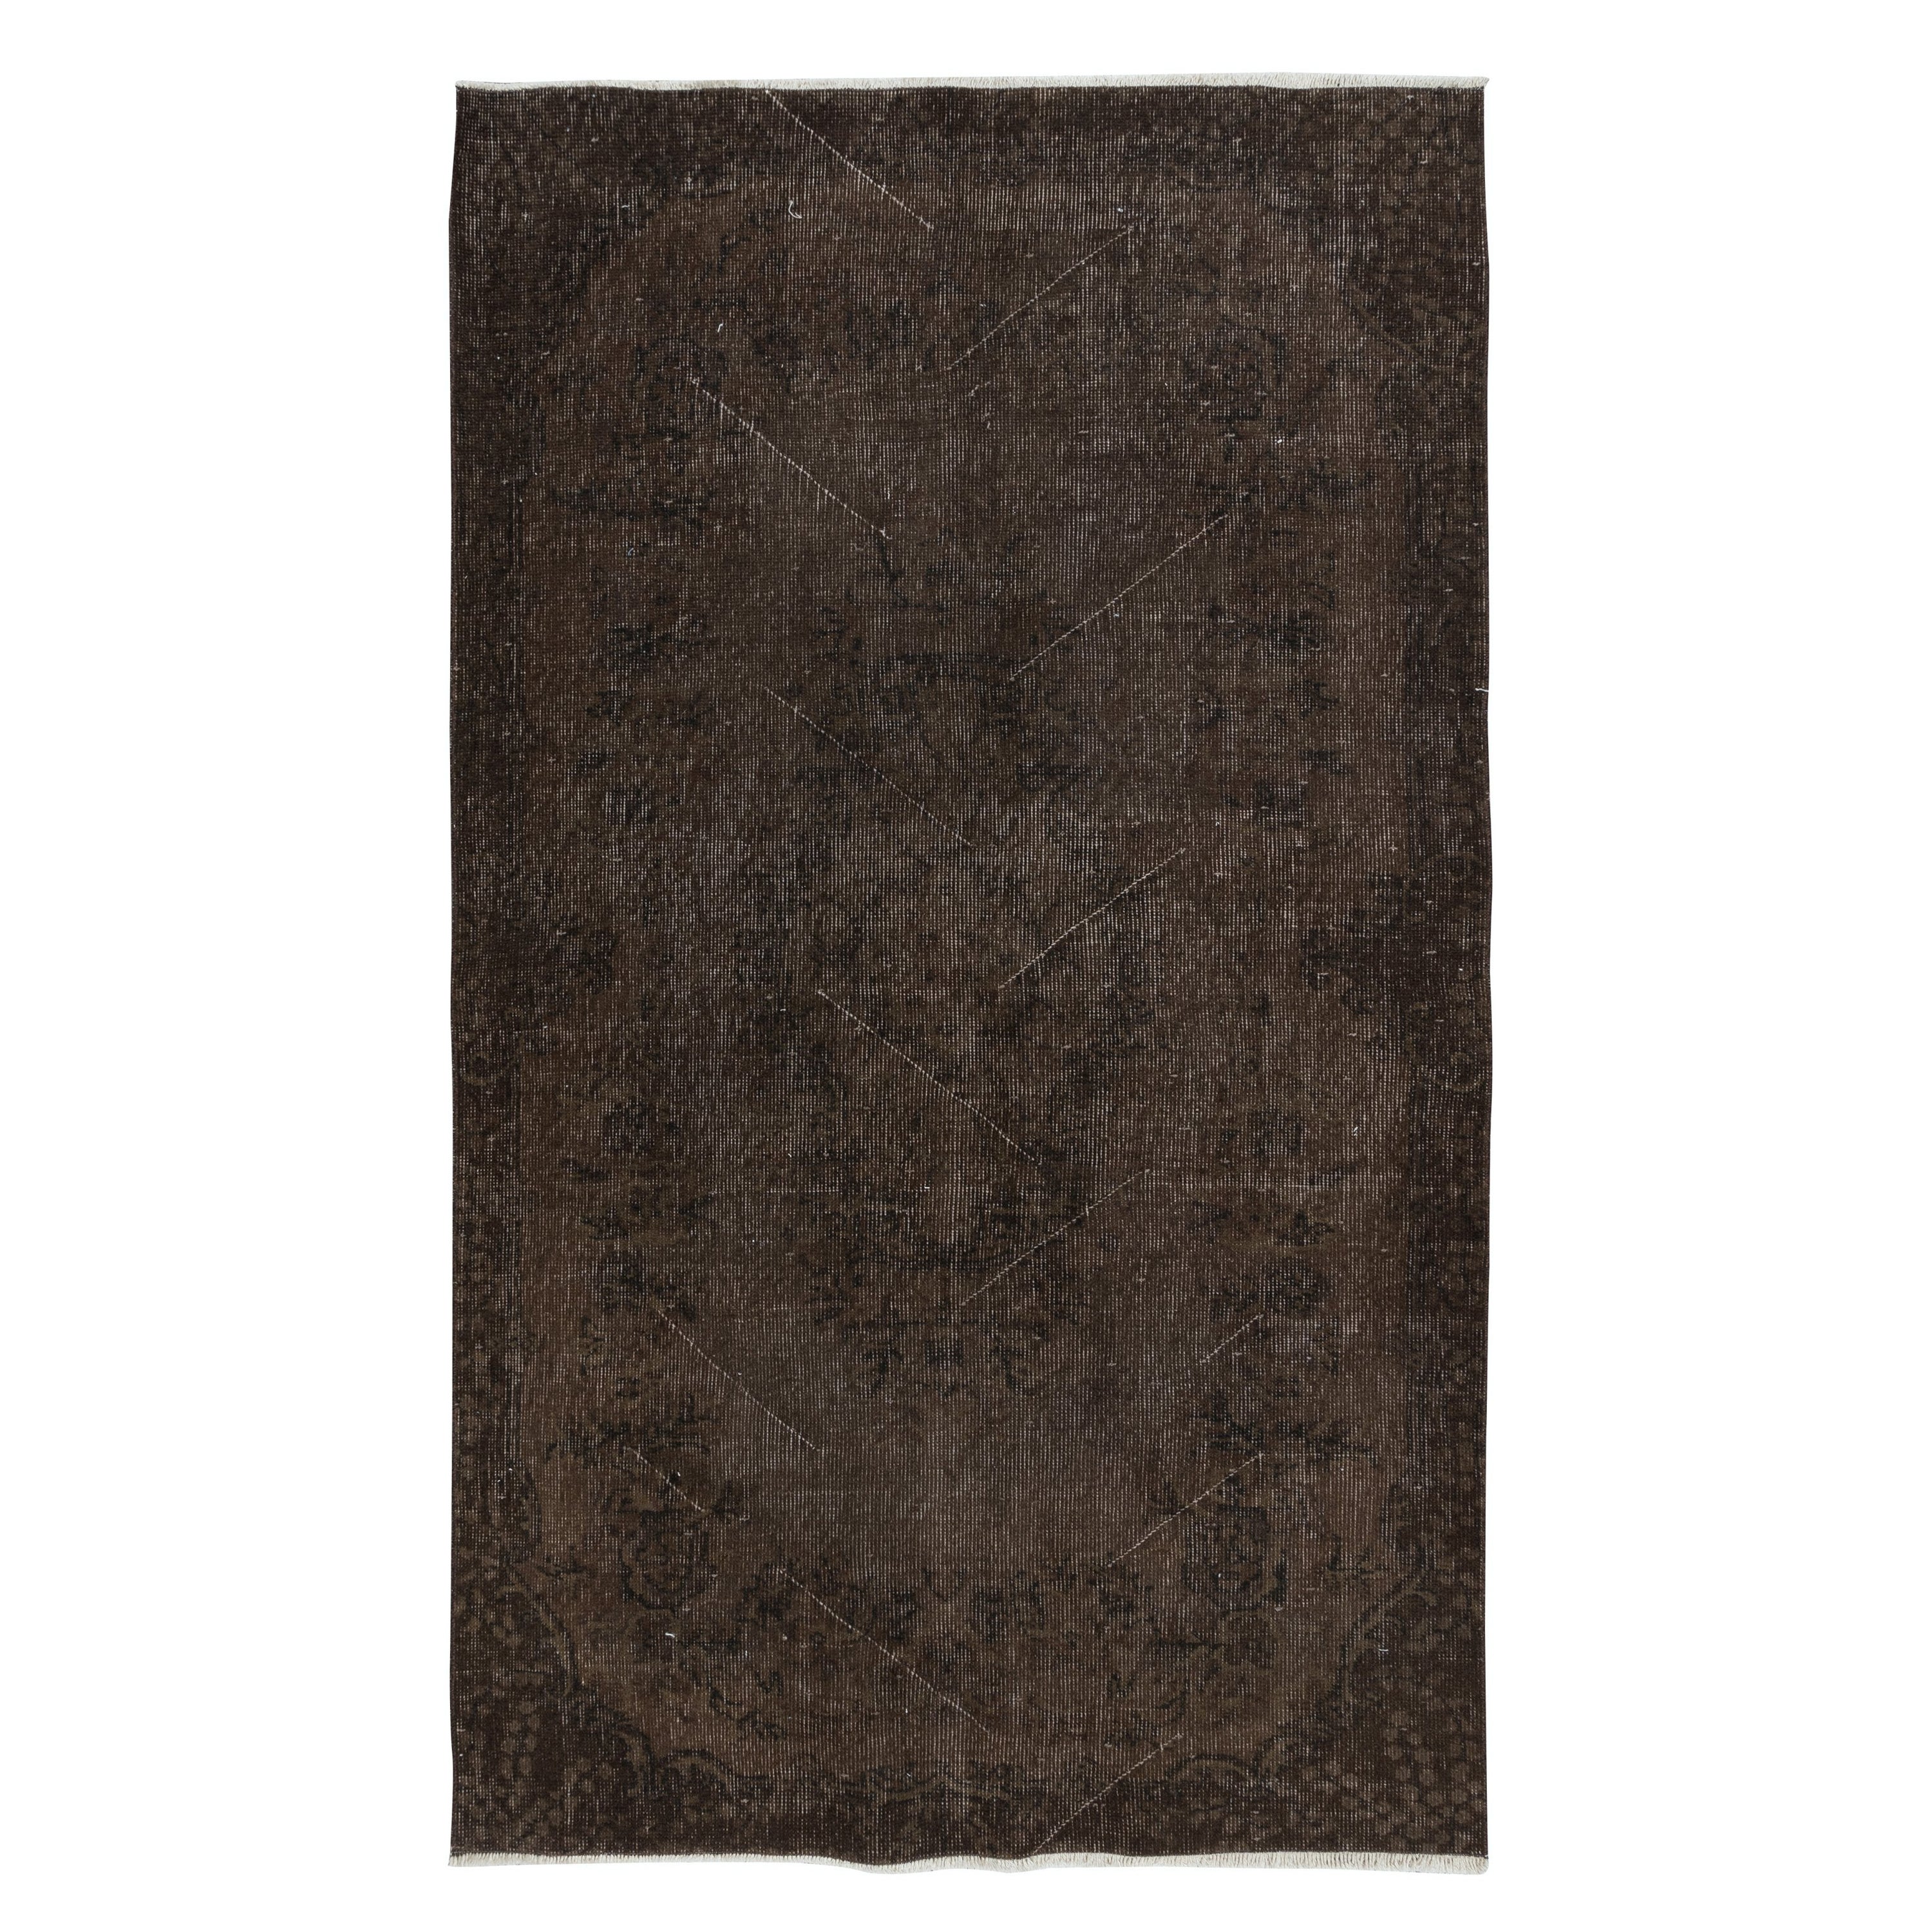 4x6.7 Ft Modern Brown Accent Rug with Medallion Design, Handknotted in Turkey